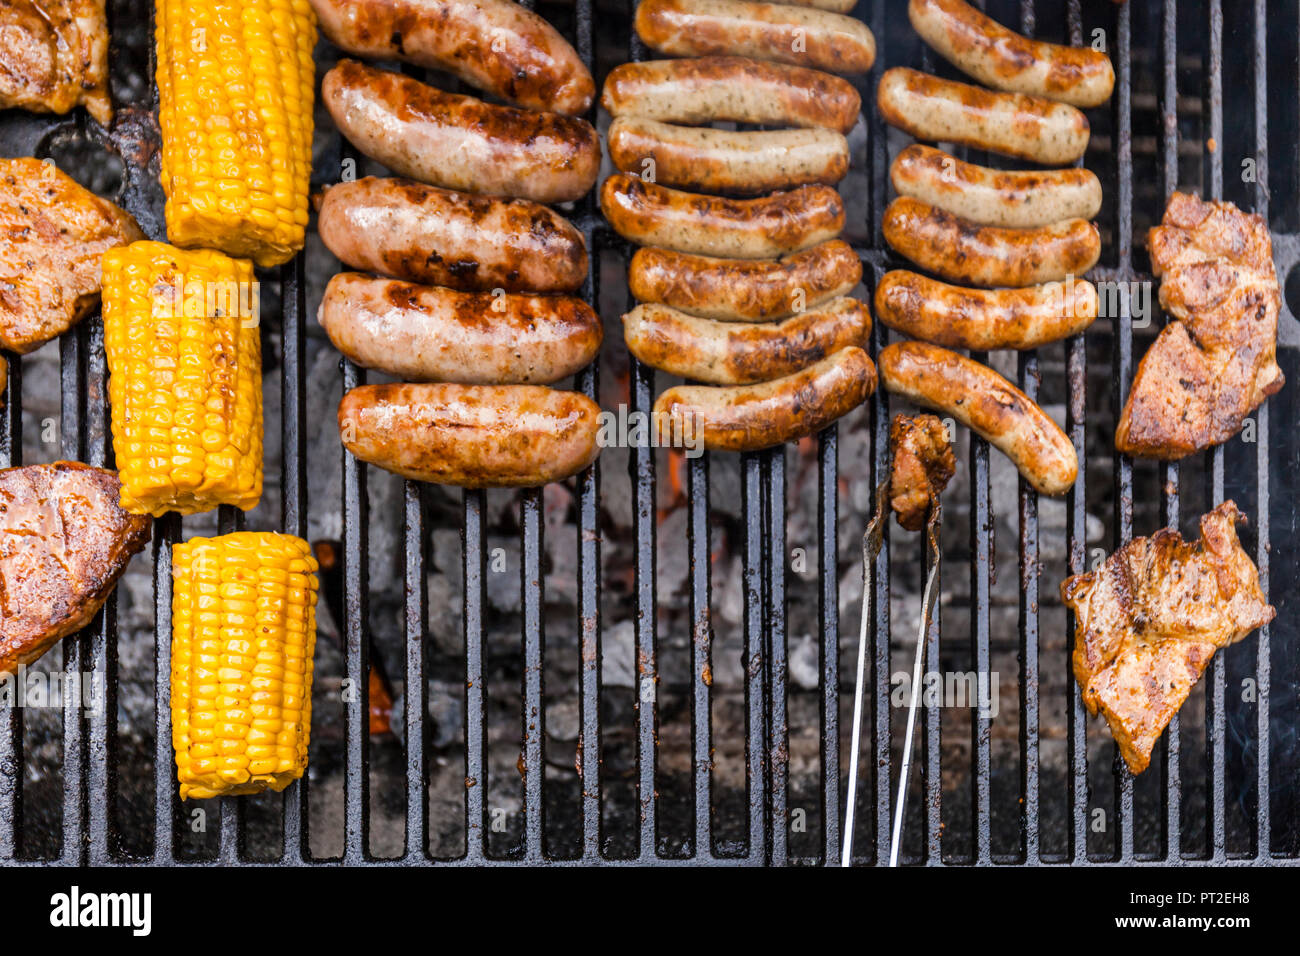 Different meat, maize and fried sausages on barbecue grill Stock Photo